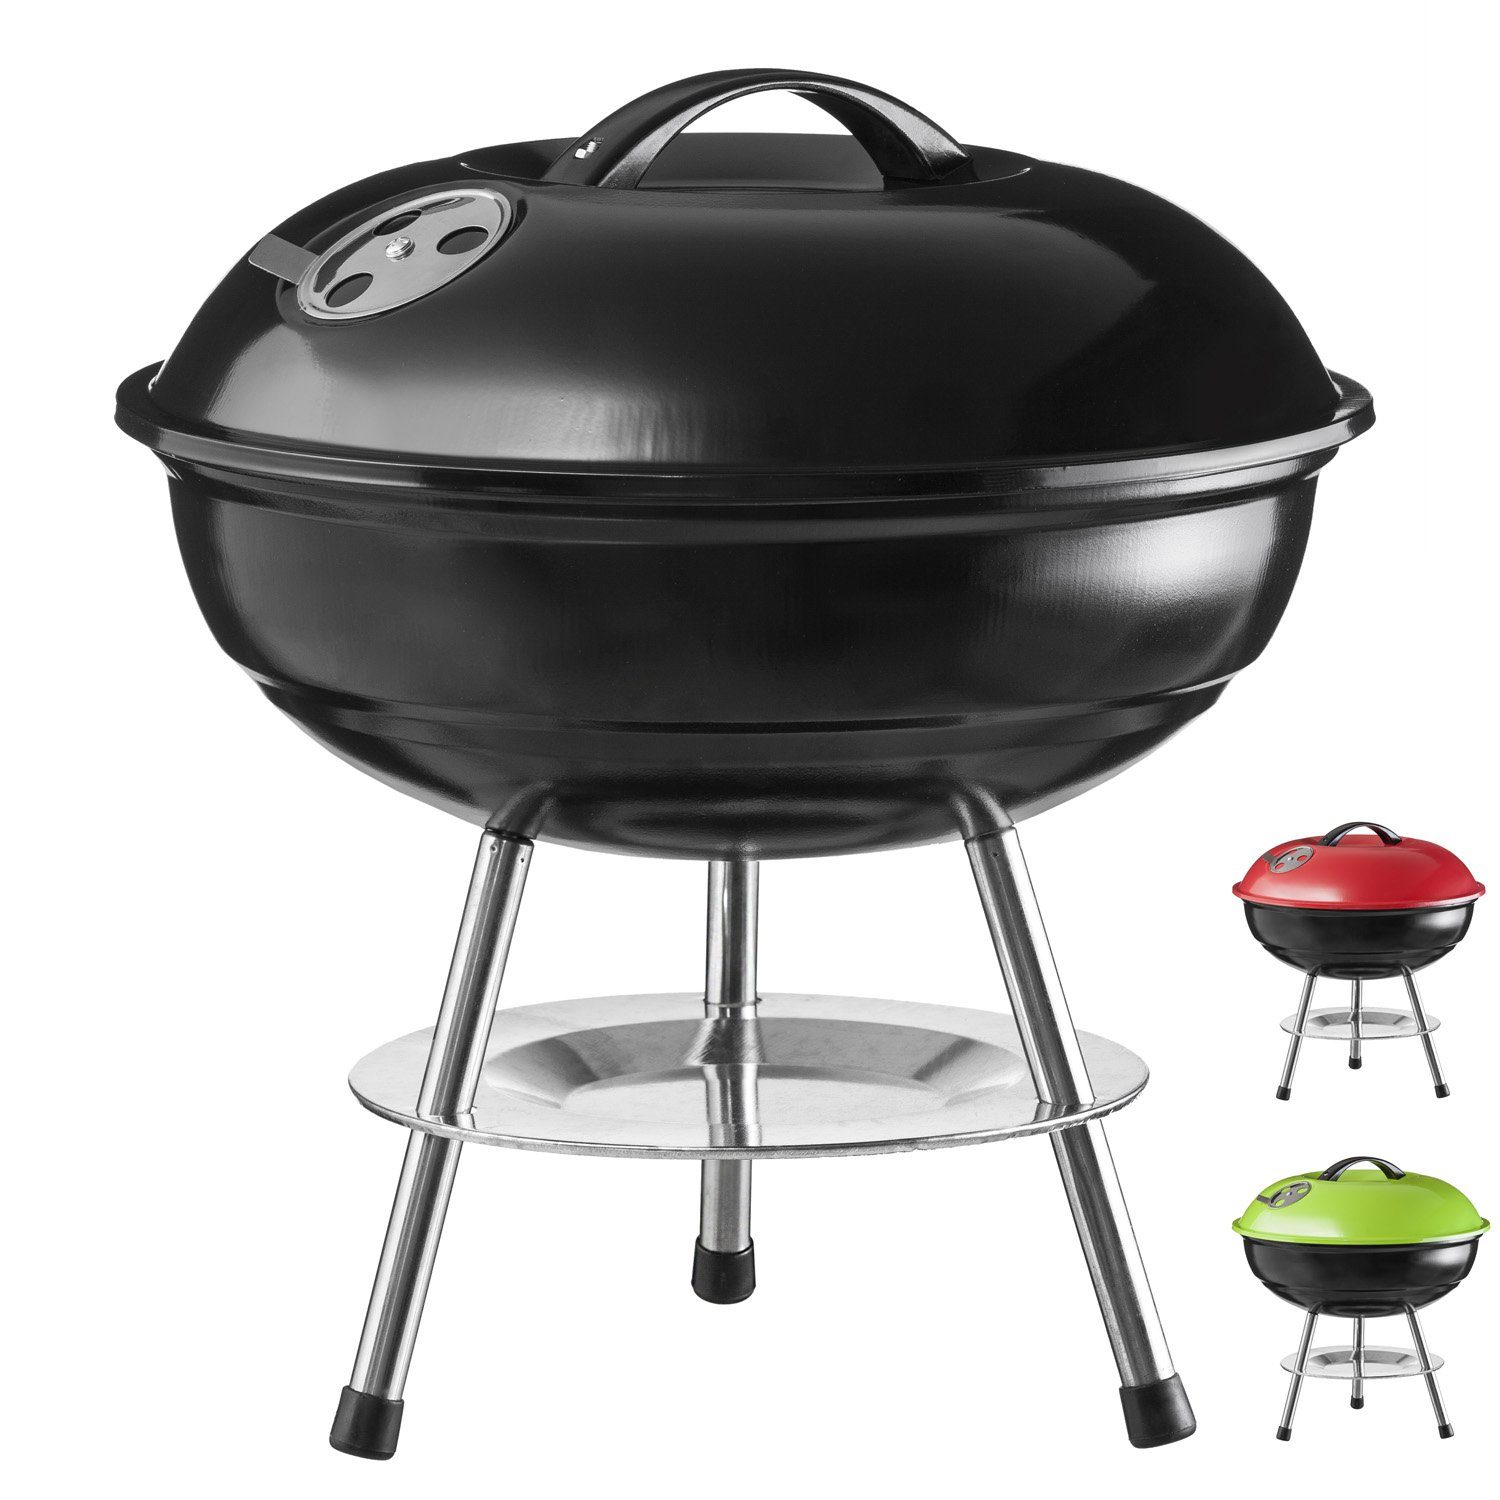 Goods+Gadgets Standgrill BBQ Grill Mini Kugelgrill, Camping Holzkohle-Grill  Tischgrill online kaufen | OTTO